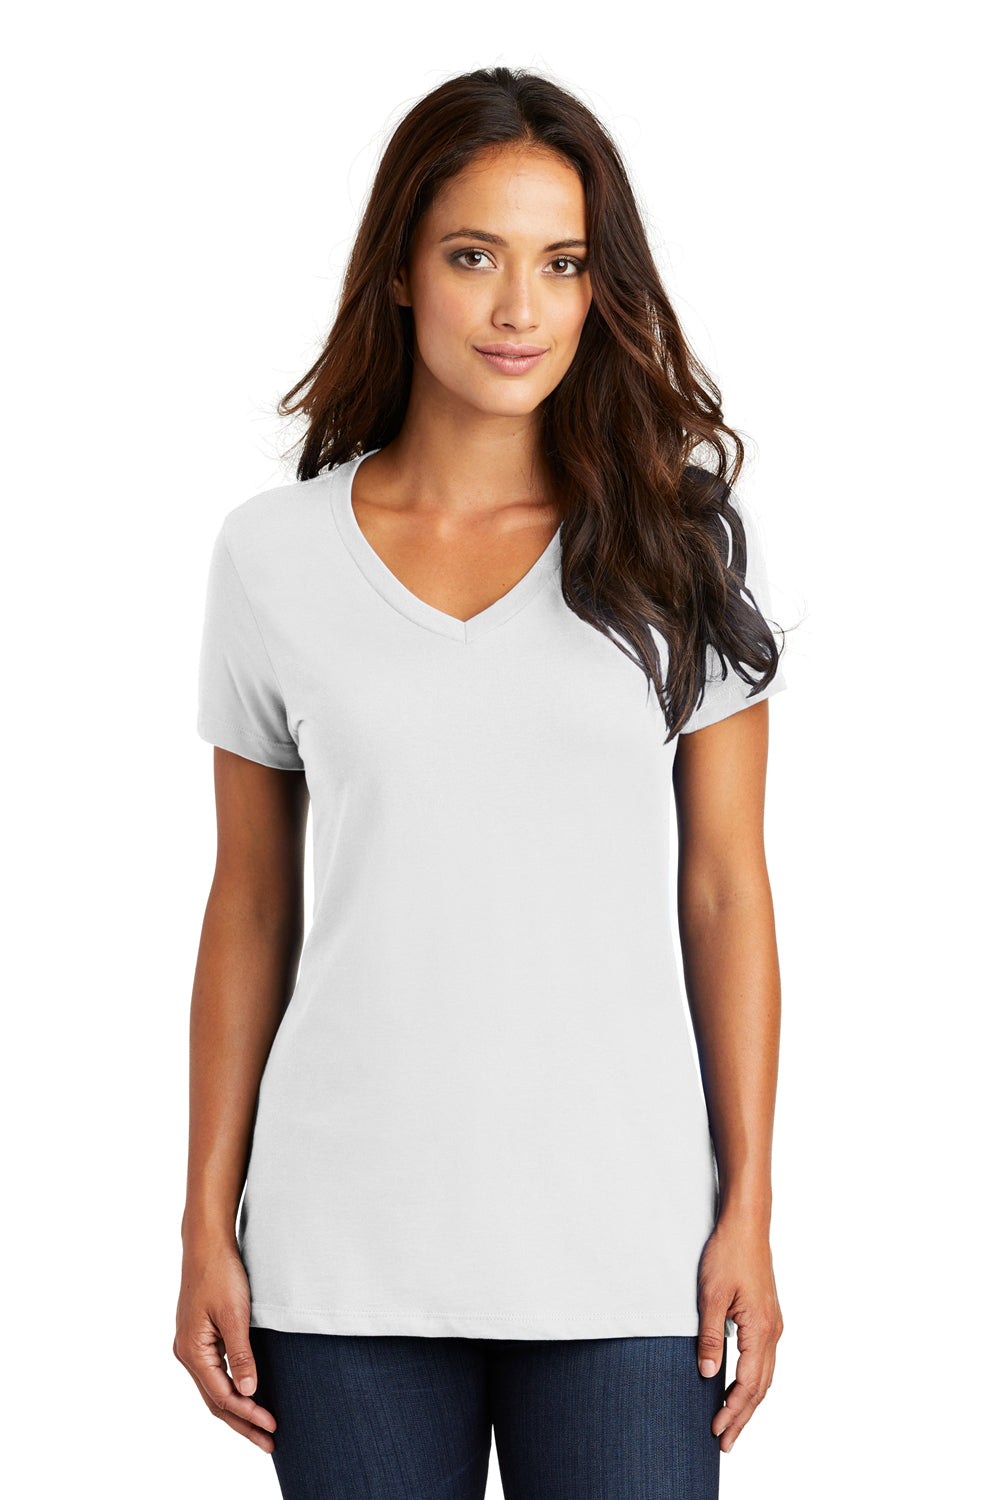 District DM1170L Womens Perfect Weight Short Sleeve V-Neck T-Shirt White Front